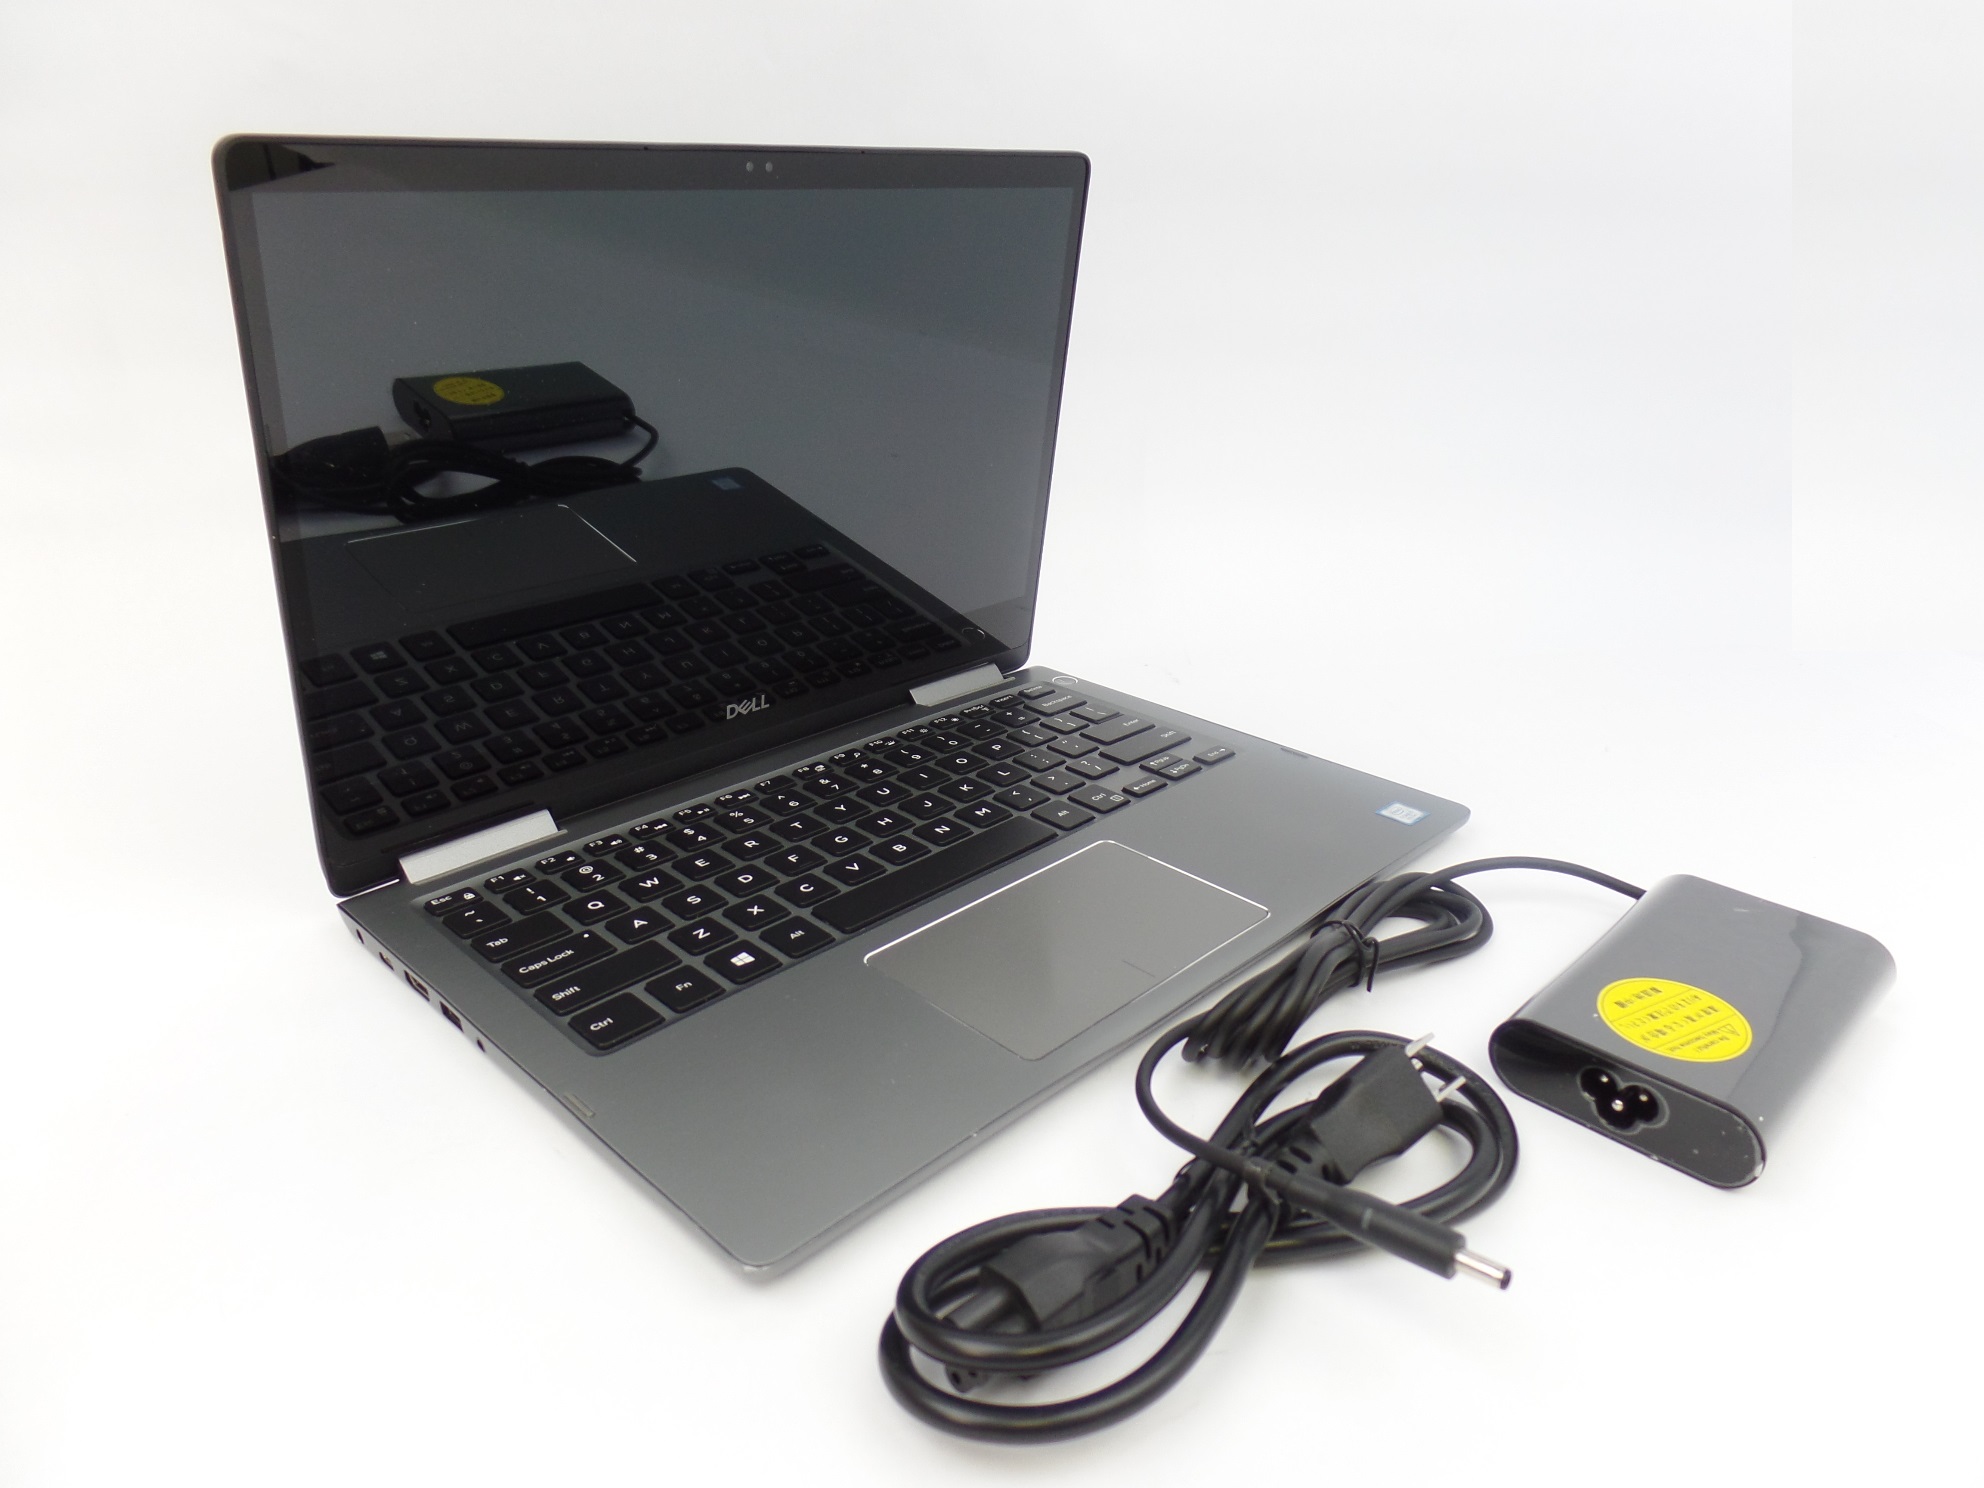 Used (good working condition) Dell Inspiron 7373 13.3" FHD Touch i7-8550U 16GB 256GB SSD W10P 2in1 Laptop U - image 1 of 6